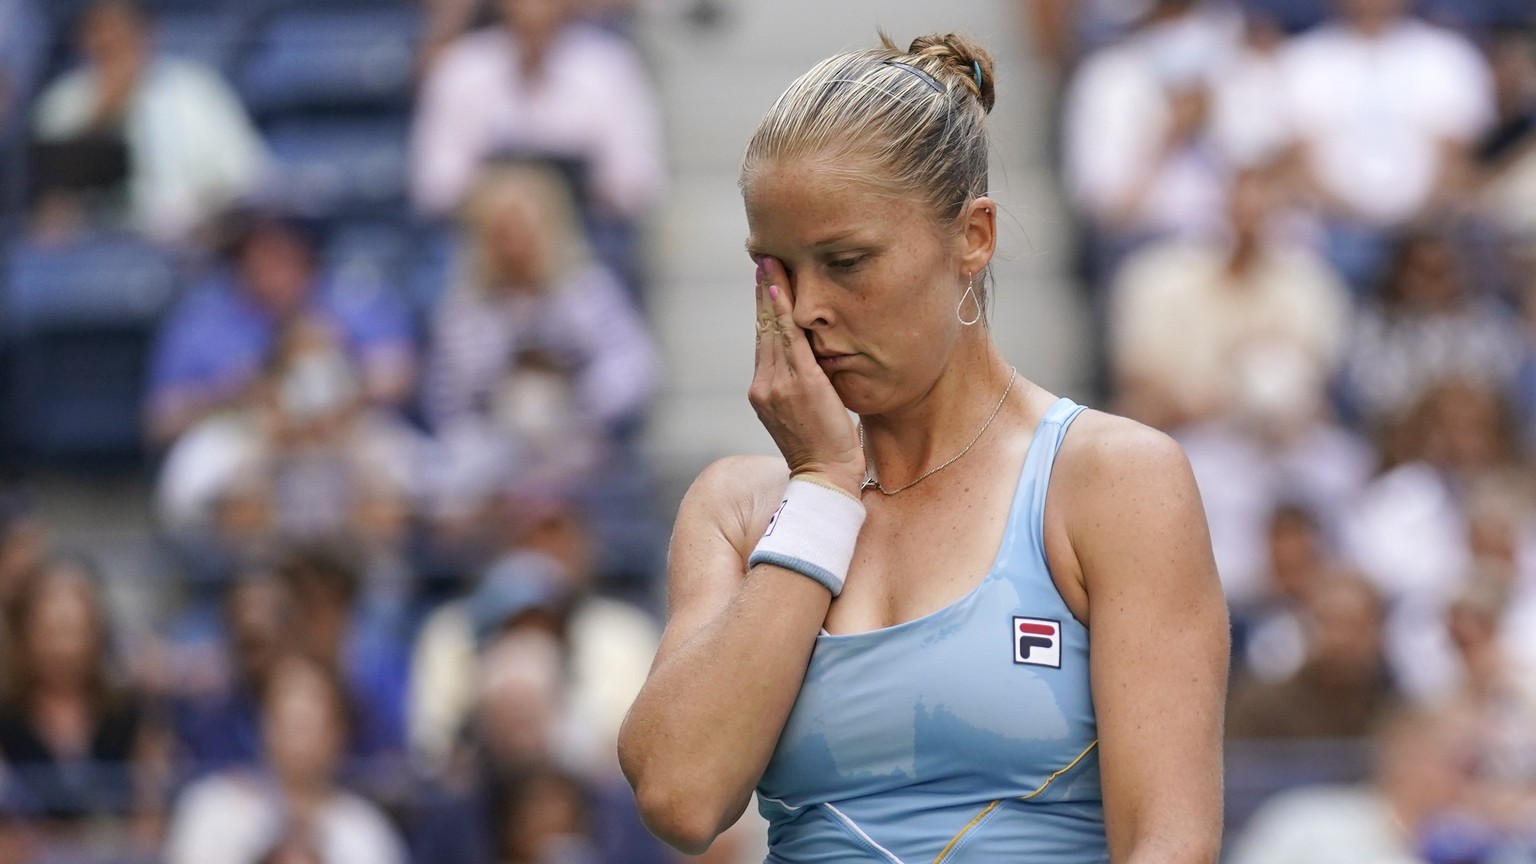 Shelby Rogers, of the United States, reacts to losing a point against Emma Raducanu, of Britain, during the fourth round of the US Open tennis championships, Monday, Sept. 6, 2021, in New York. (AP Ph ...